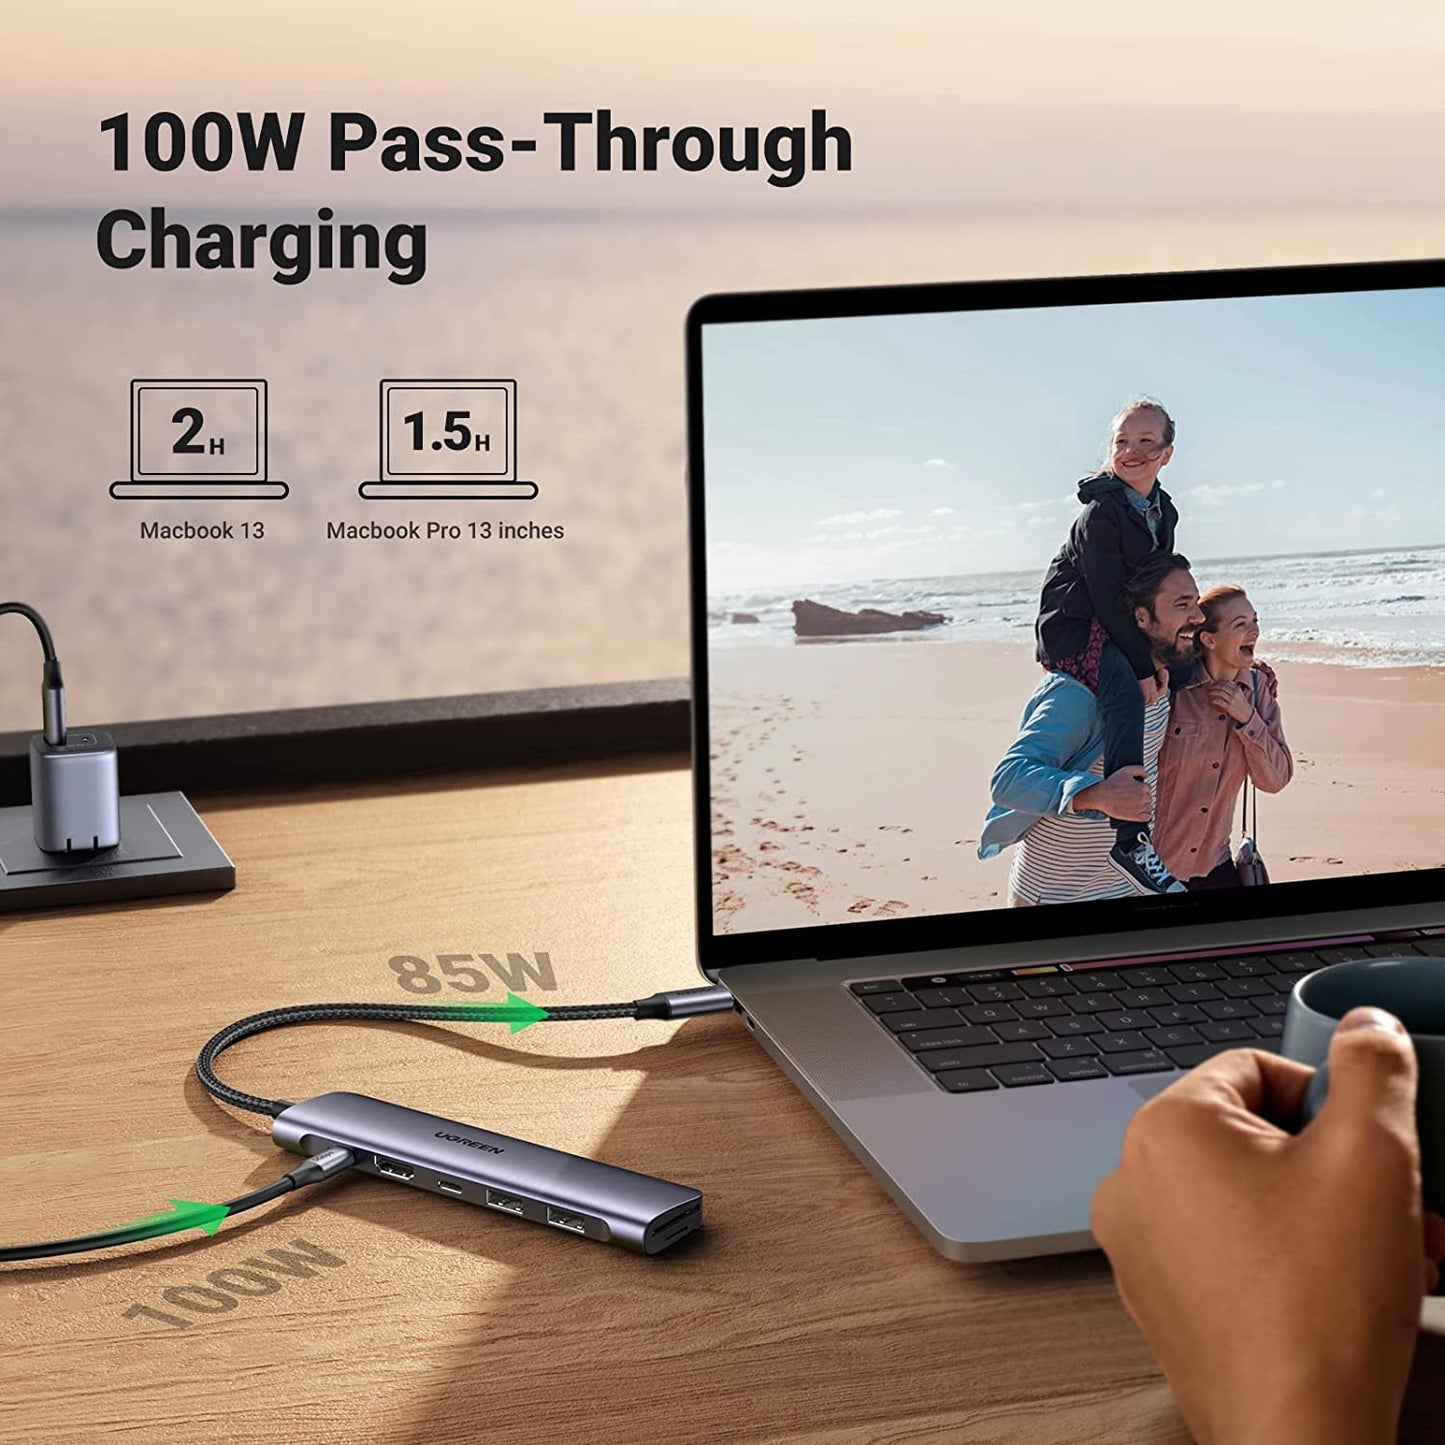  7-in-1 USB-C Hub with 4K HDMI, 100W Power Delivery, High-Speed Data Ports, SD/TF Card Reader - Compatible with MacBook Pro/Air, iPad Pro, Surface, XPS, ThinkPad, and More